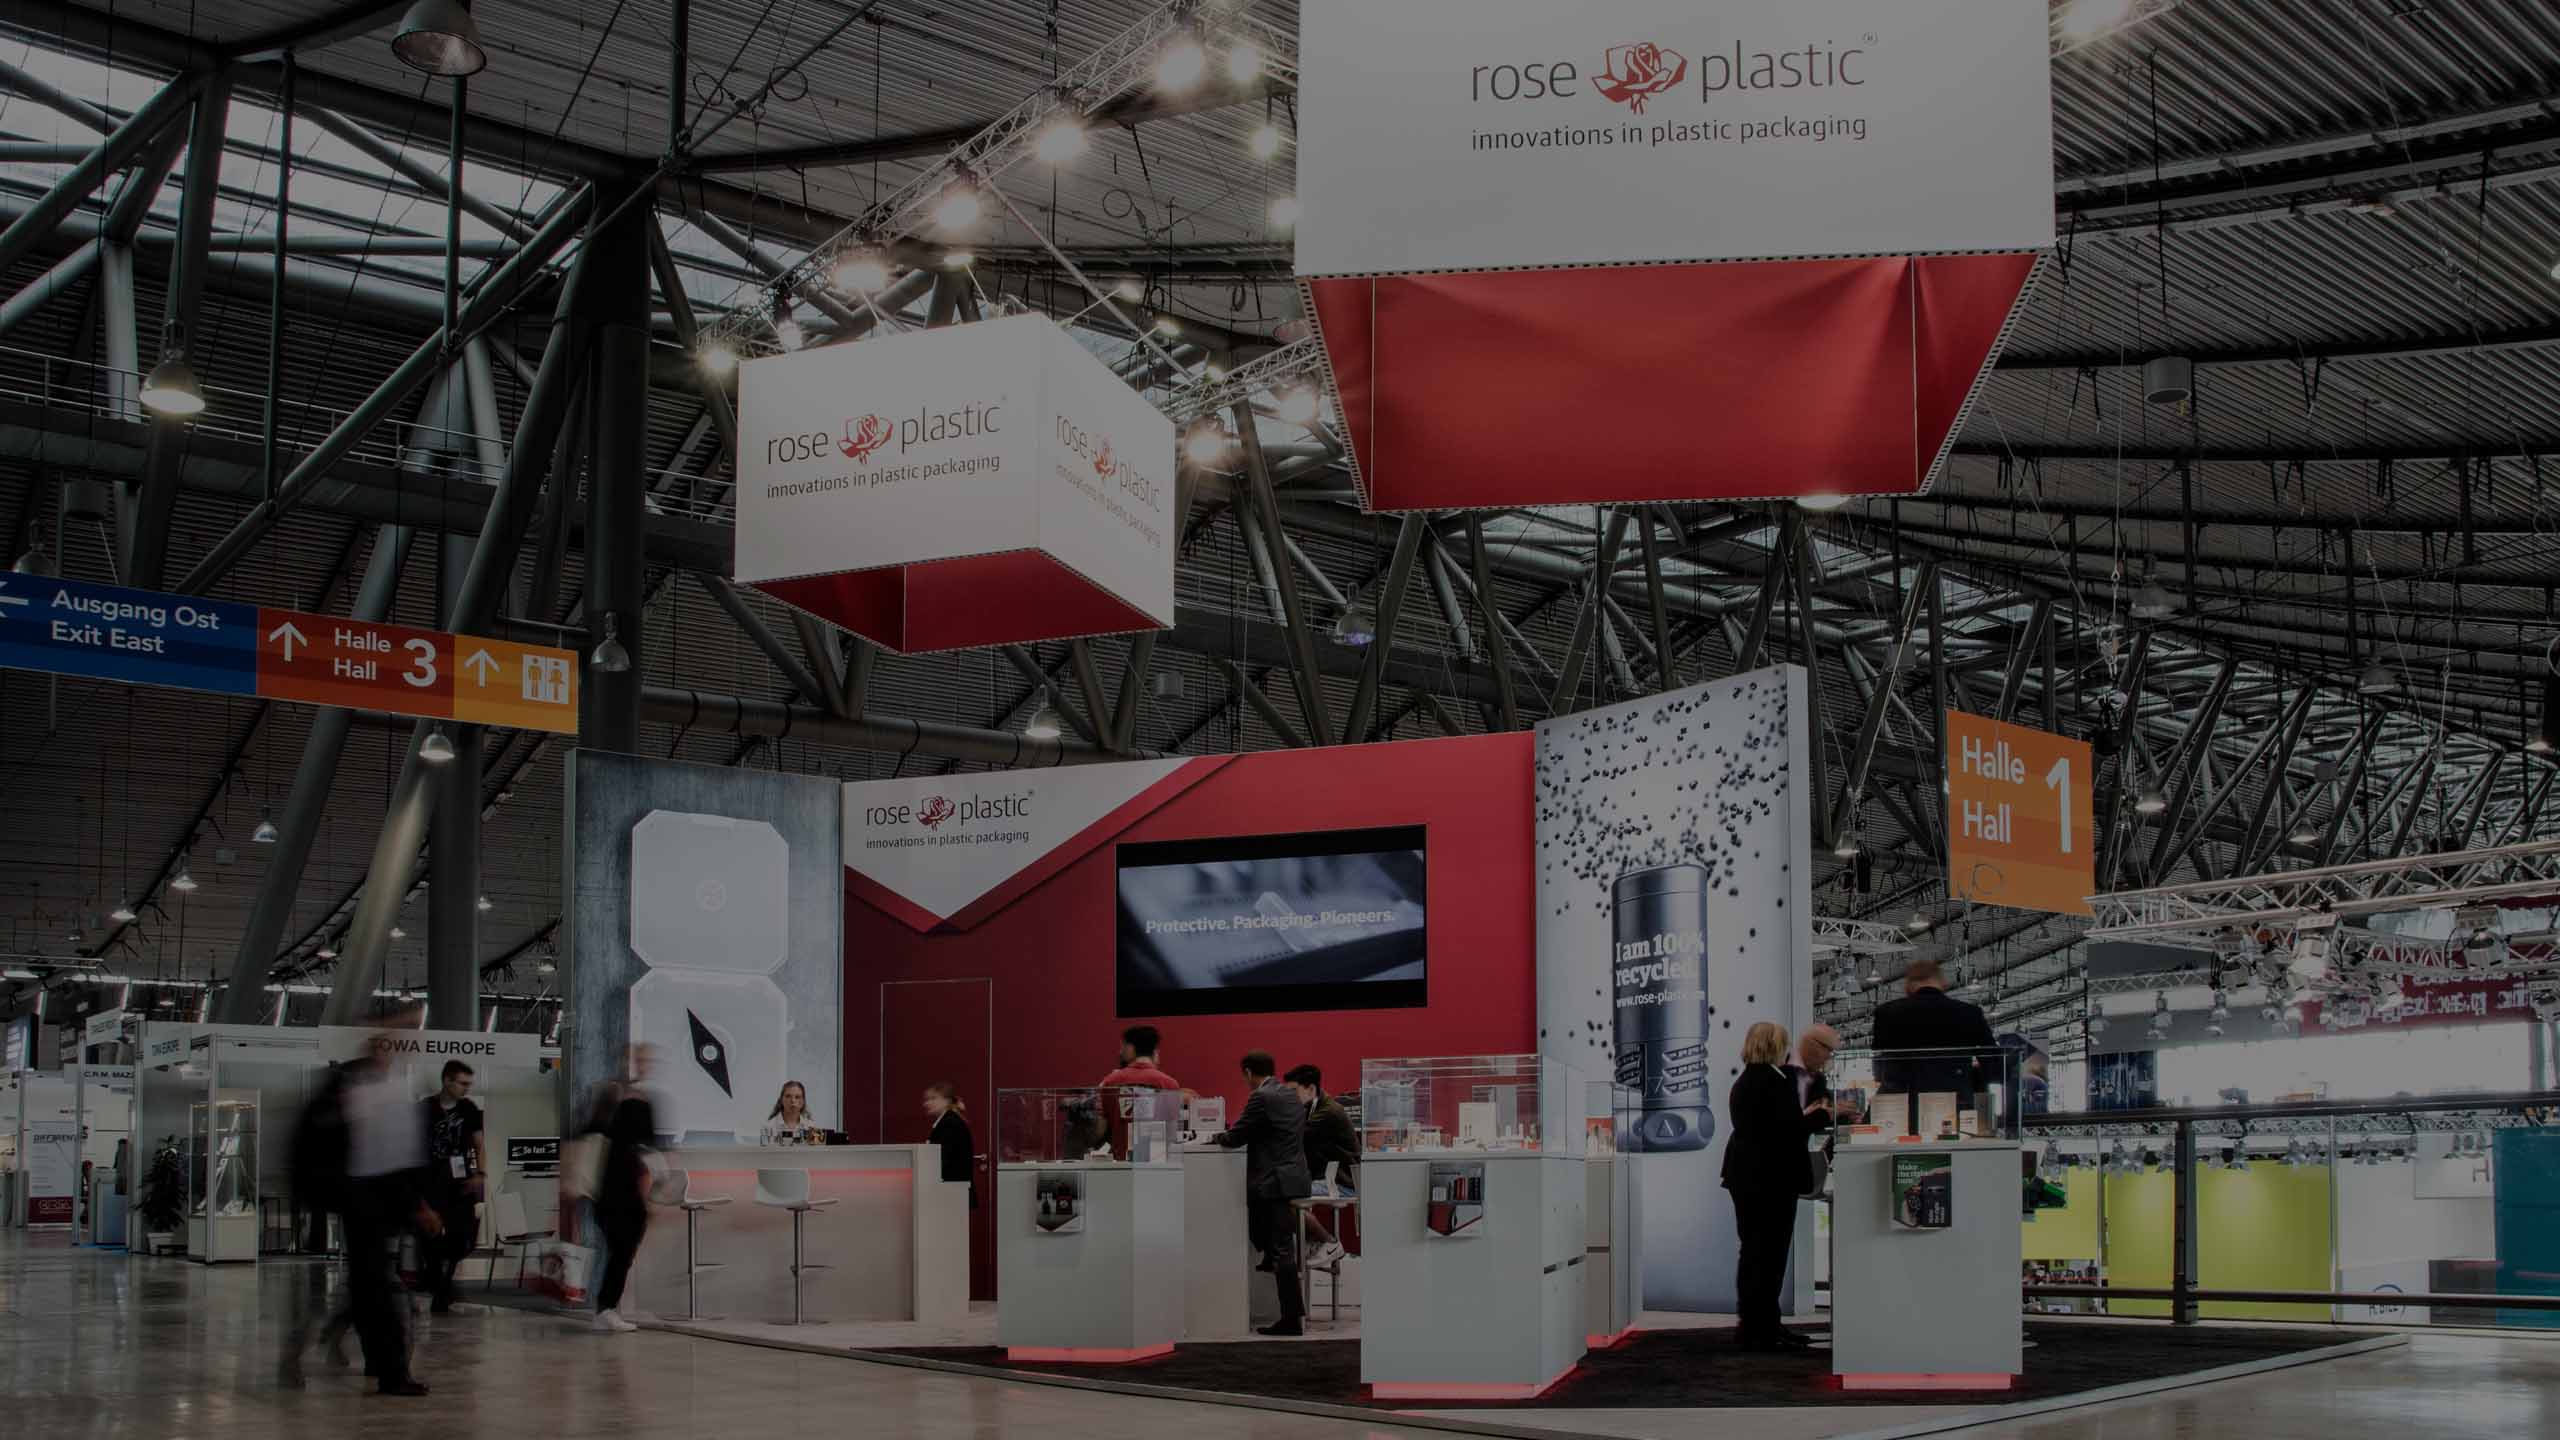 rose plastic's participation in trade fairs worldwide.